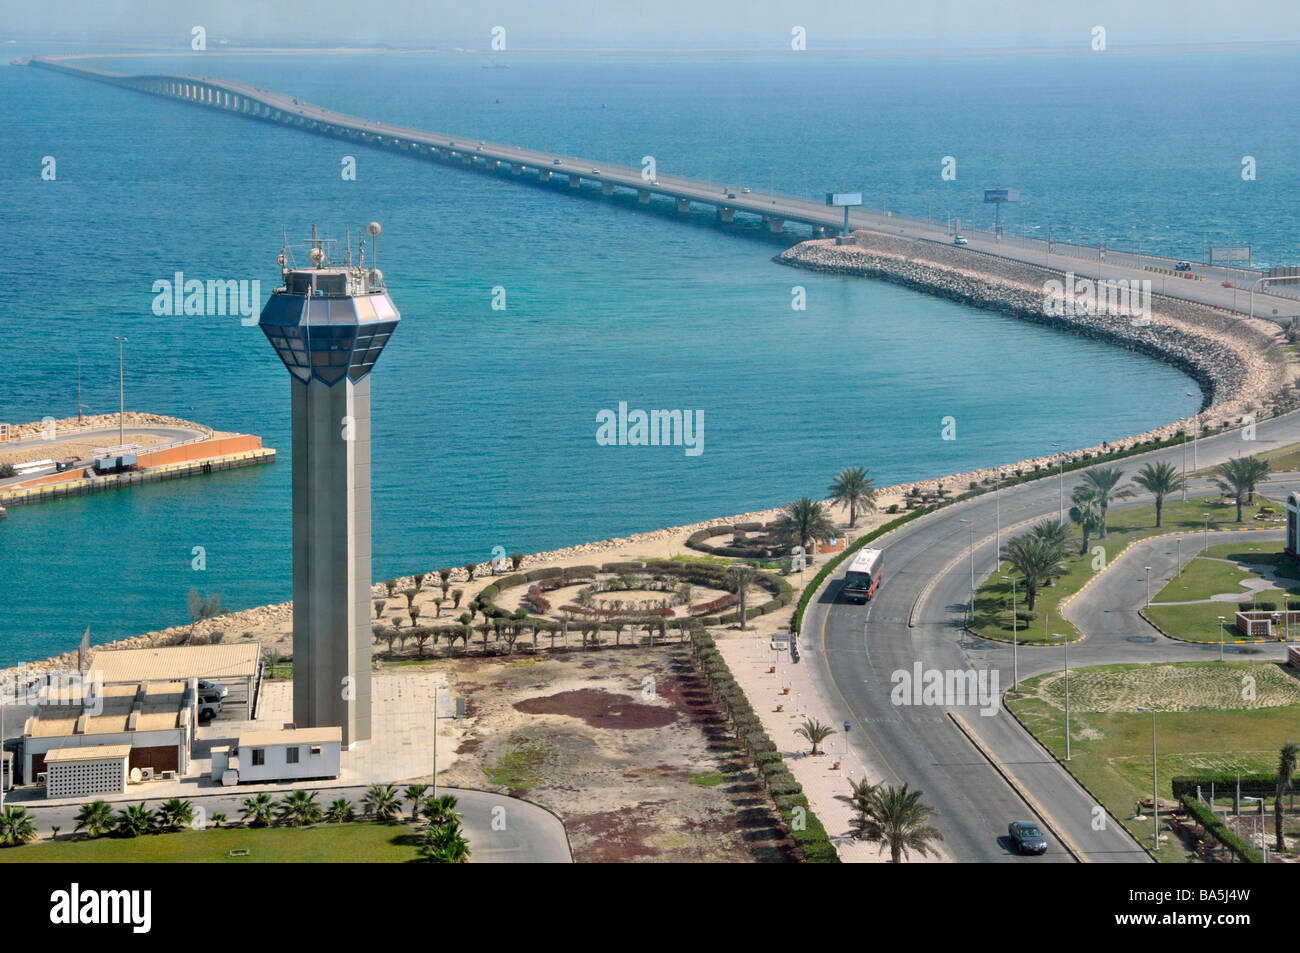 Aerial view services area on King Fahd Causeway linking Bahrain and Saudi Arabia in Persian Gulf looking towards Bahrain from approx 'mid point' Stock Photo